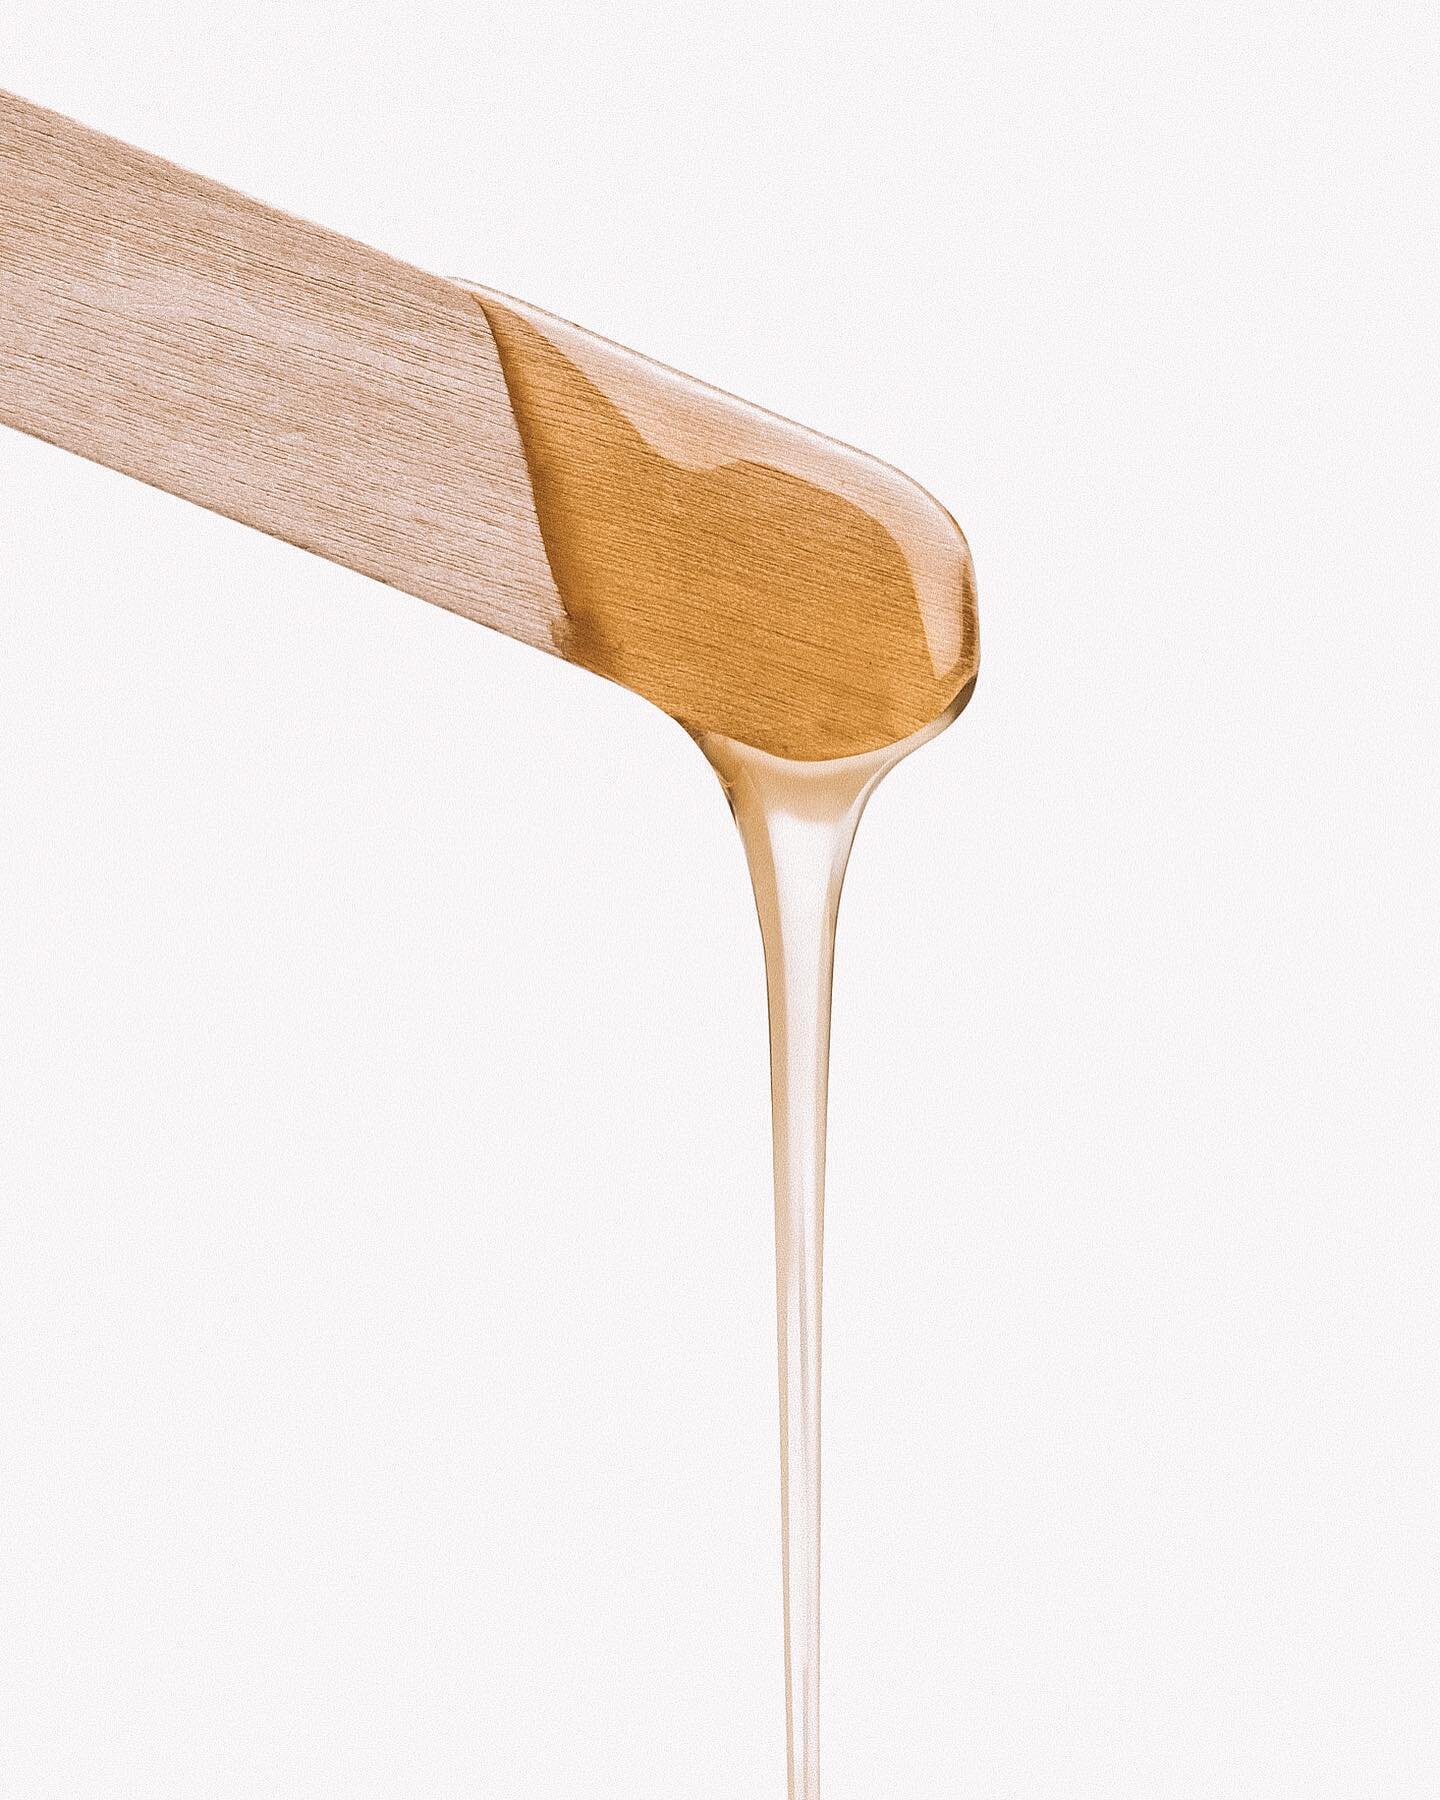 _______ Let&rsquo;s talk waxing

When it comes to waxing, it&rsquo;s good to know what makes a good waxing treatment stand out from a bad one. As a Therapist it can take years to master that perfect technique, it&rsquo;s not as simple and straight fo